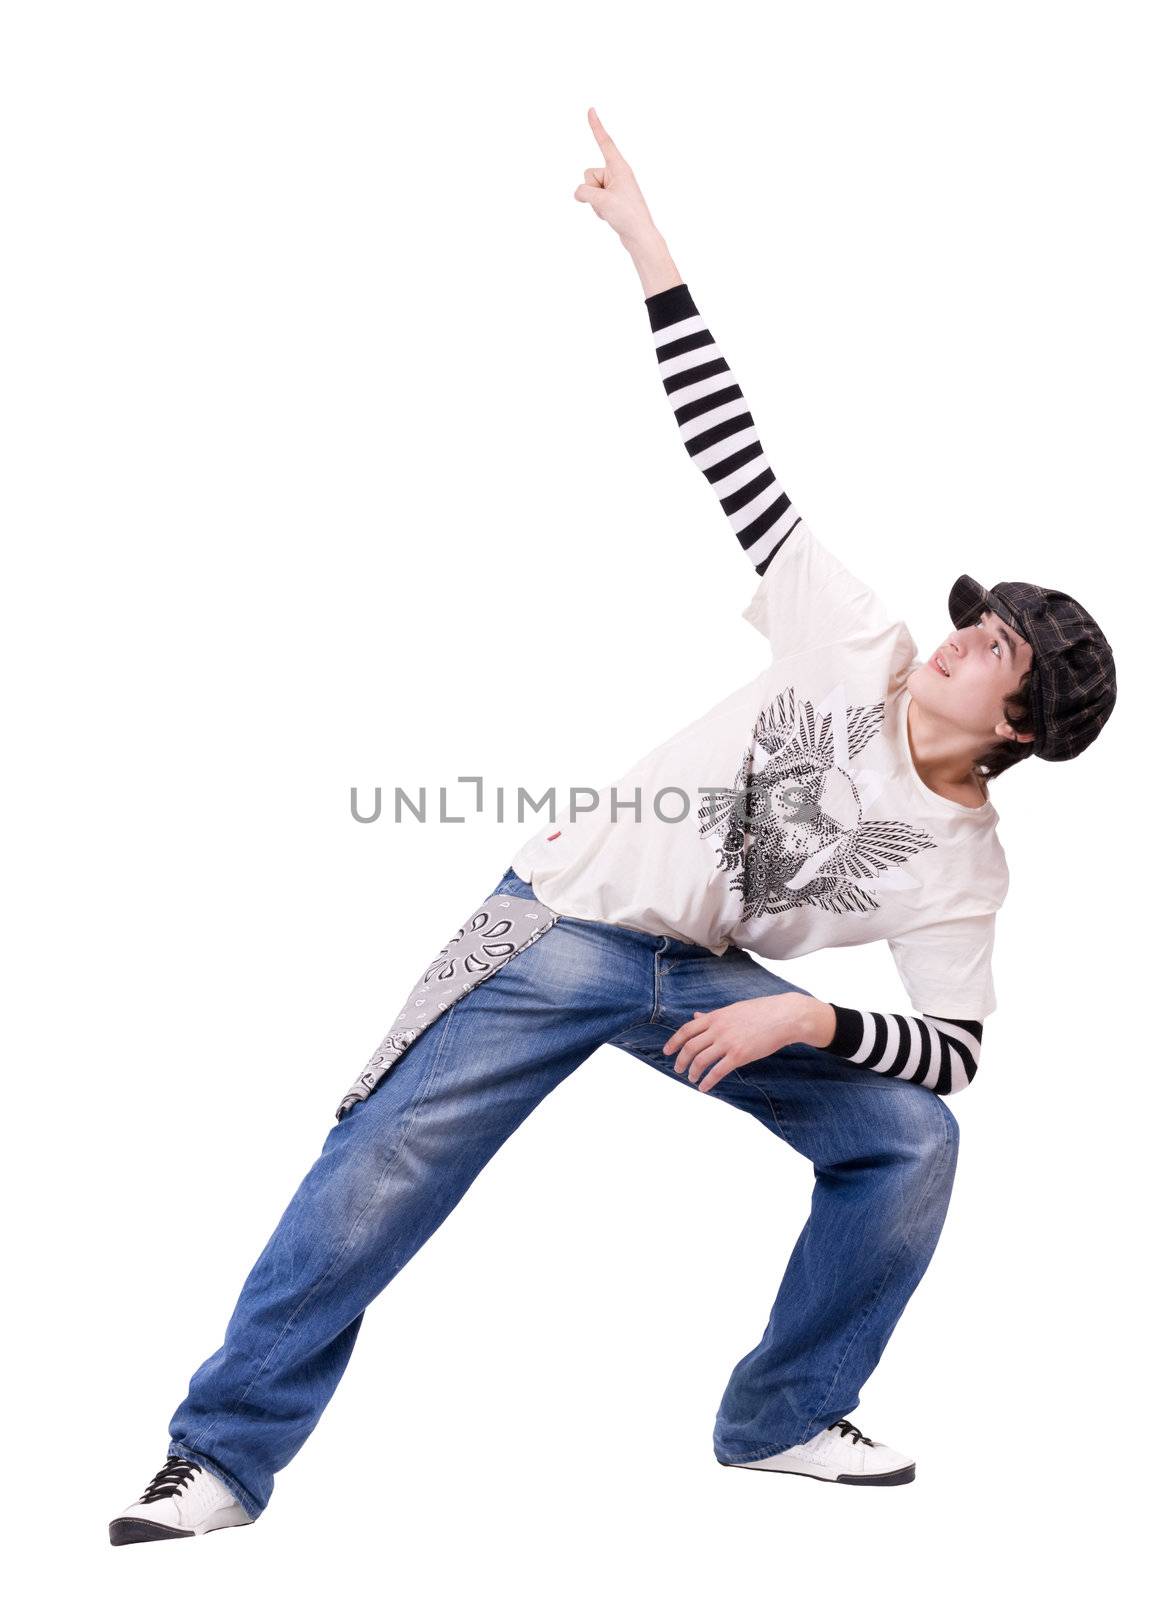 Teenage boy dancing Locking or Hip-hop dance on isolated background. His look up and raise his hand with finger for show something.